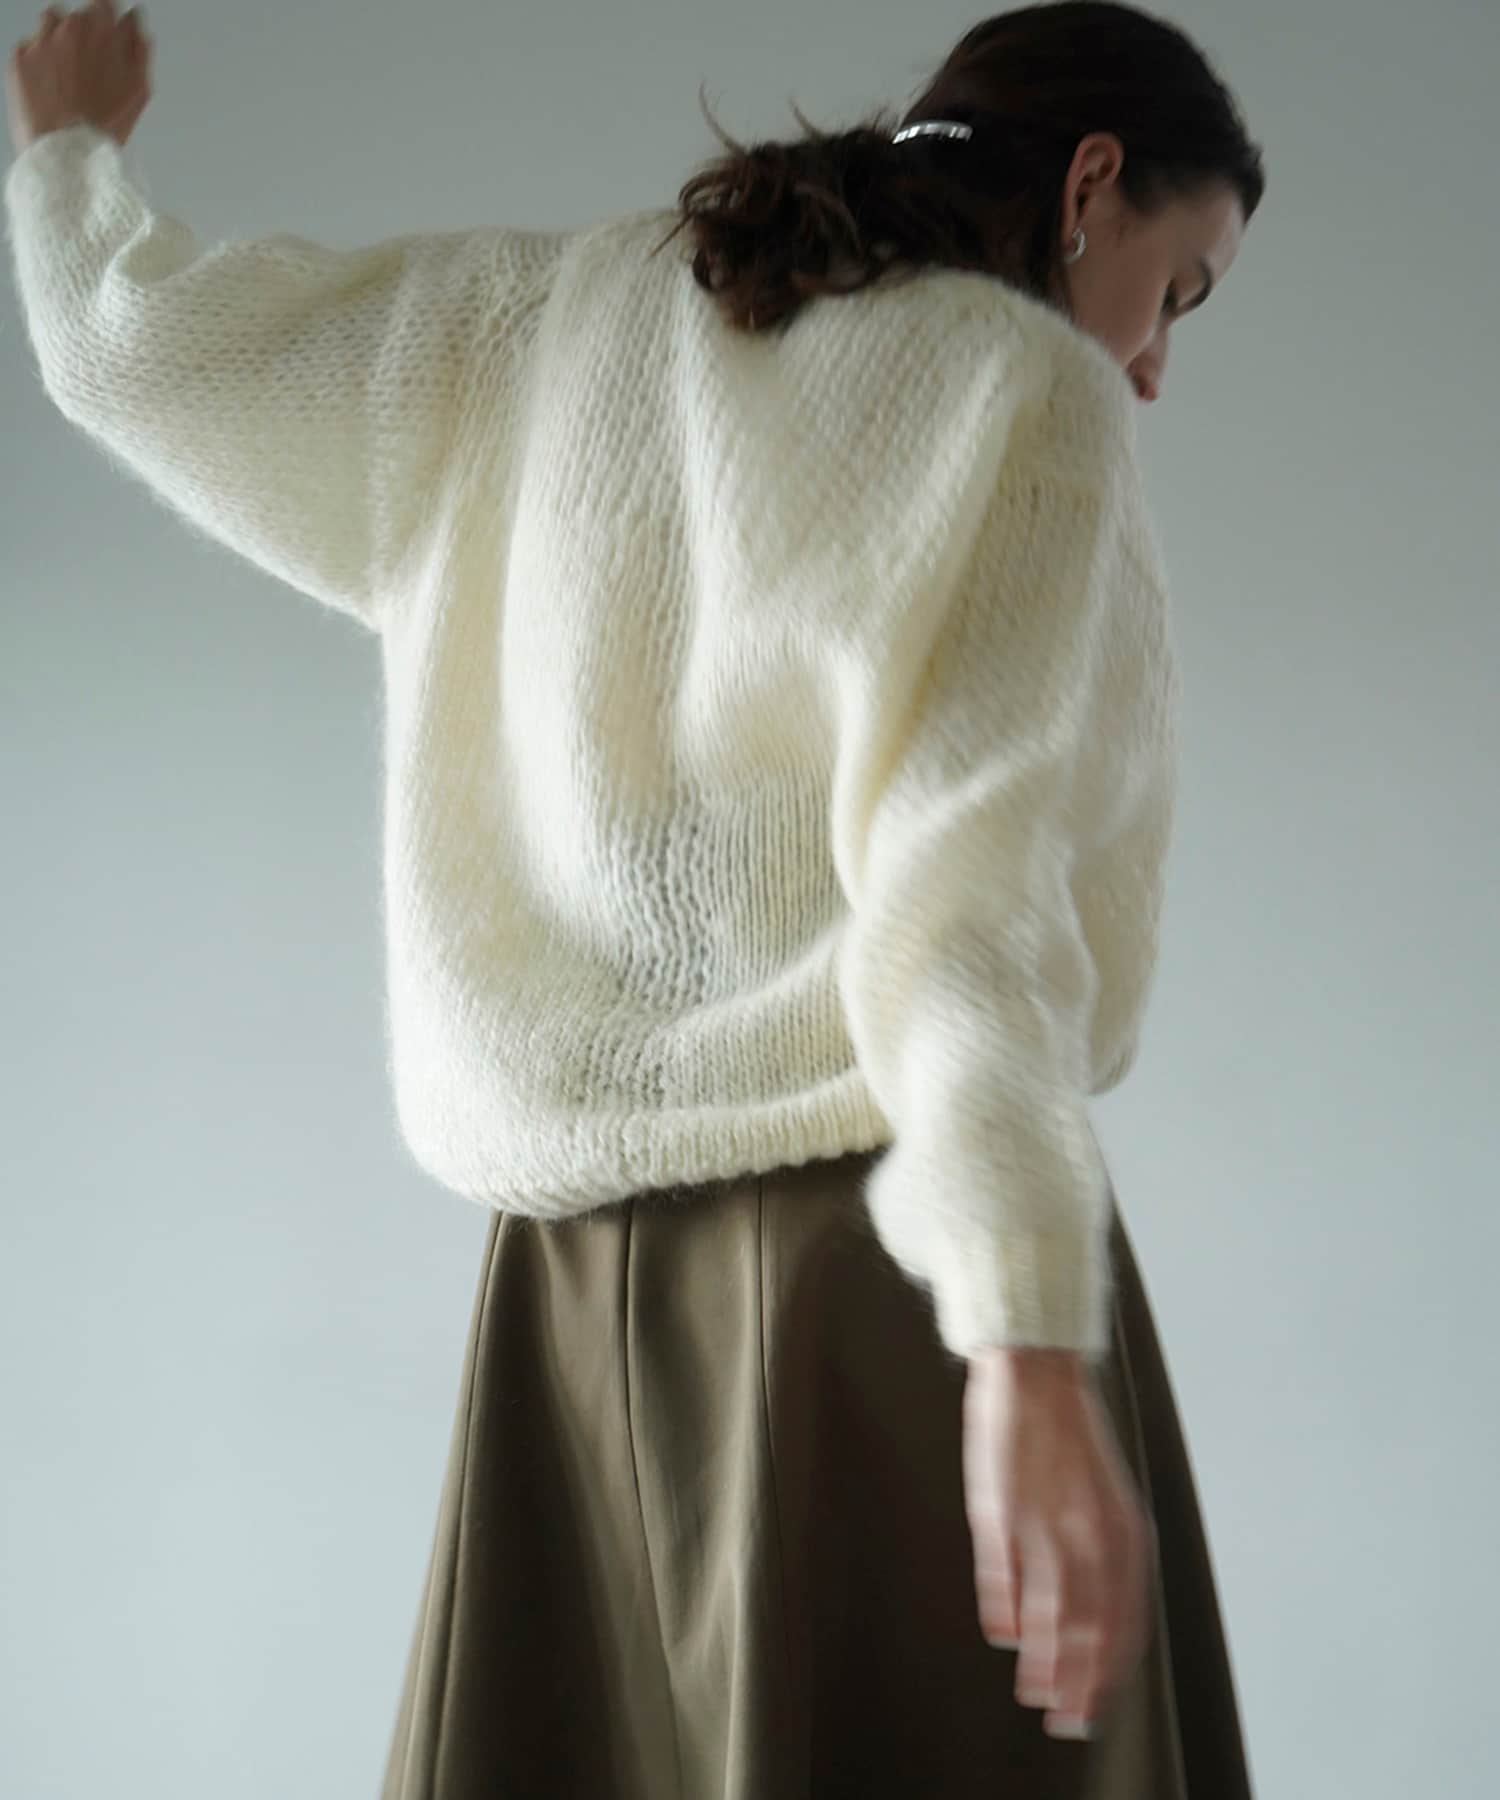 HALF SHEER LOOSE MOHAIR KNIT TOPS(1 IVORY): CLANE: WOMENS ...